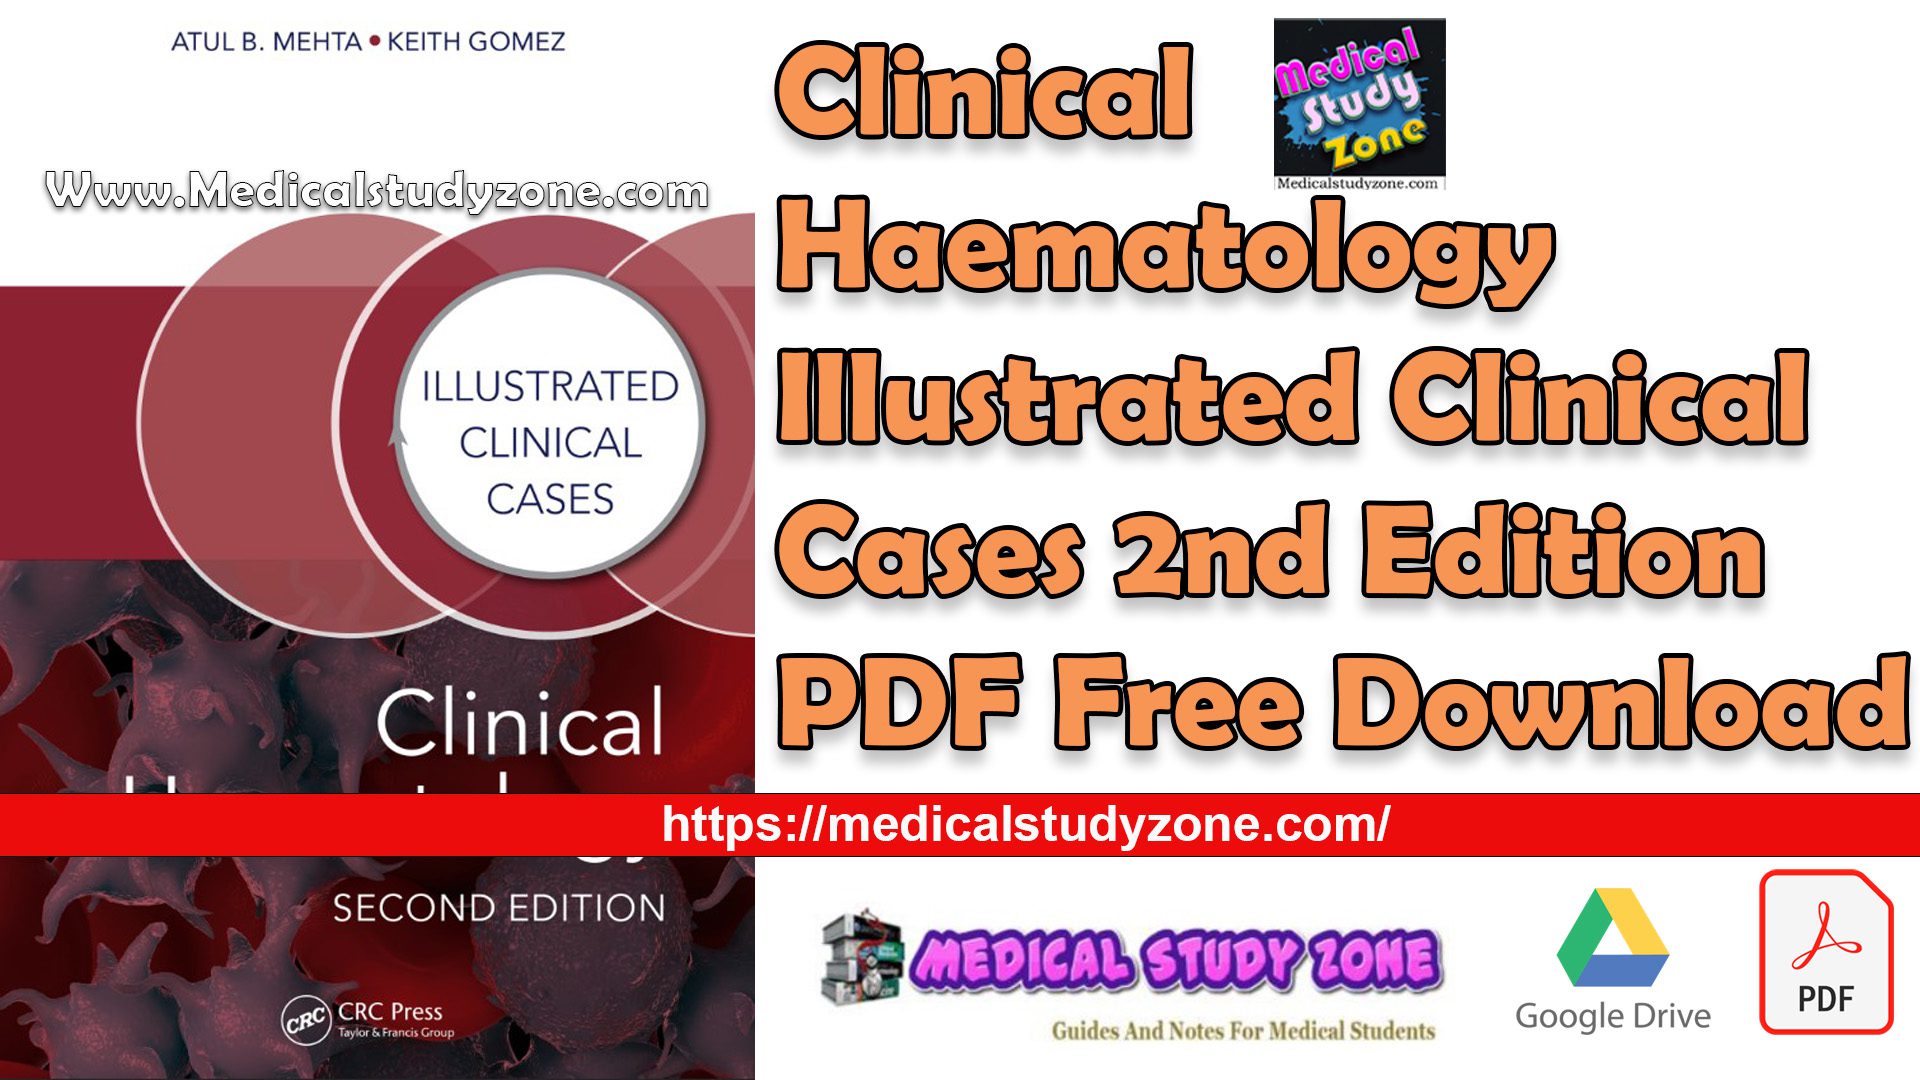 Clinical Haematology Illustrated Clinical Cases 2nd Edition PDF Free Download